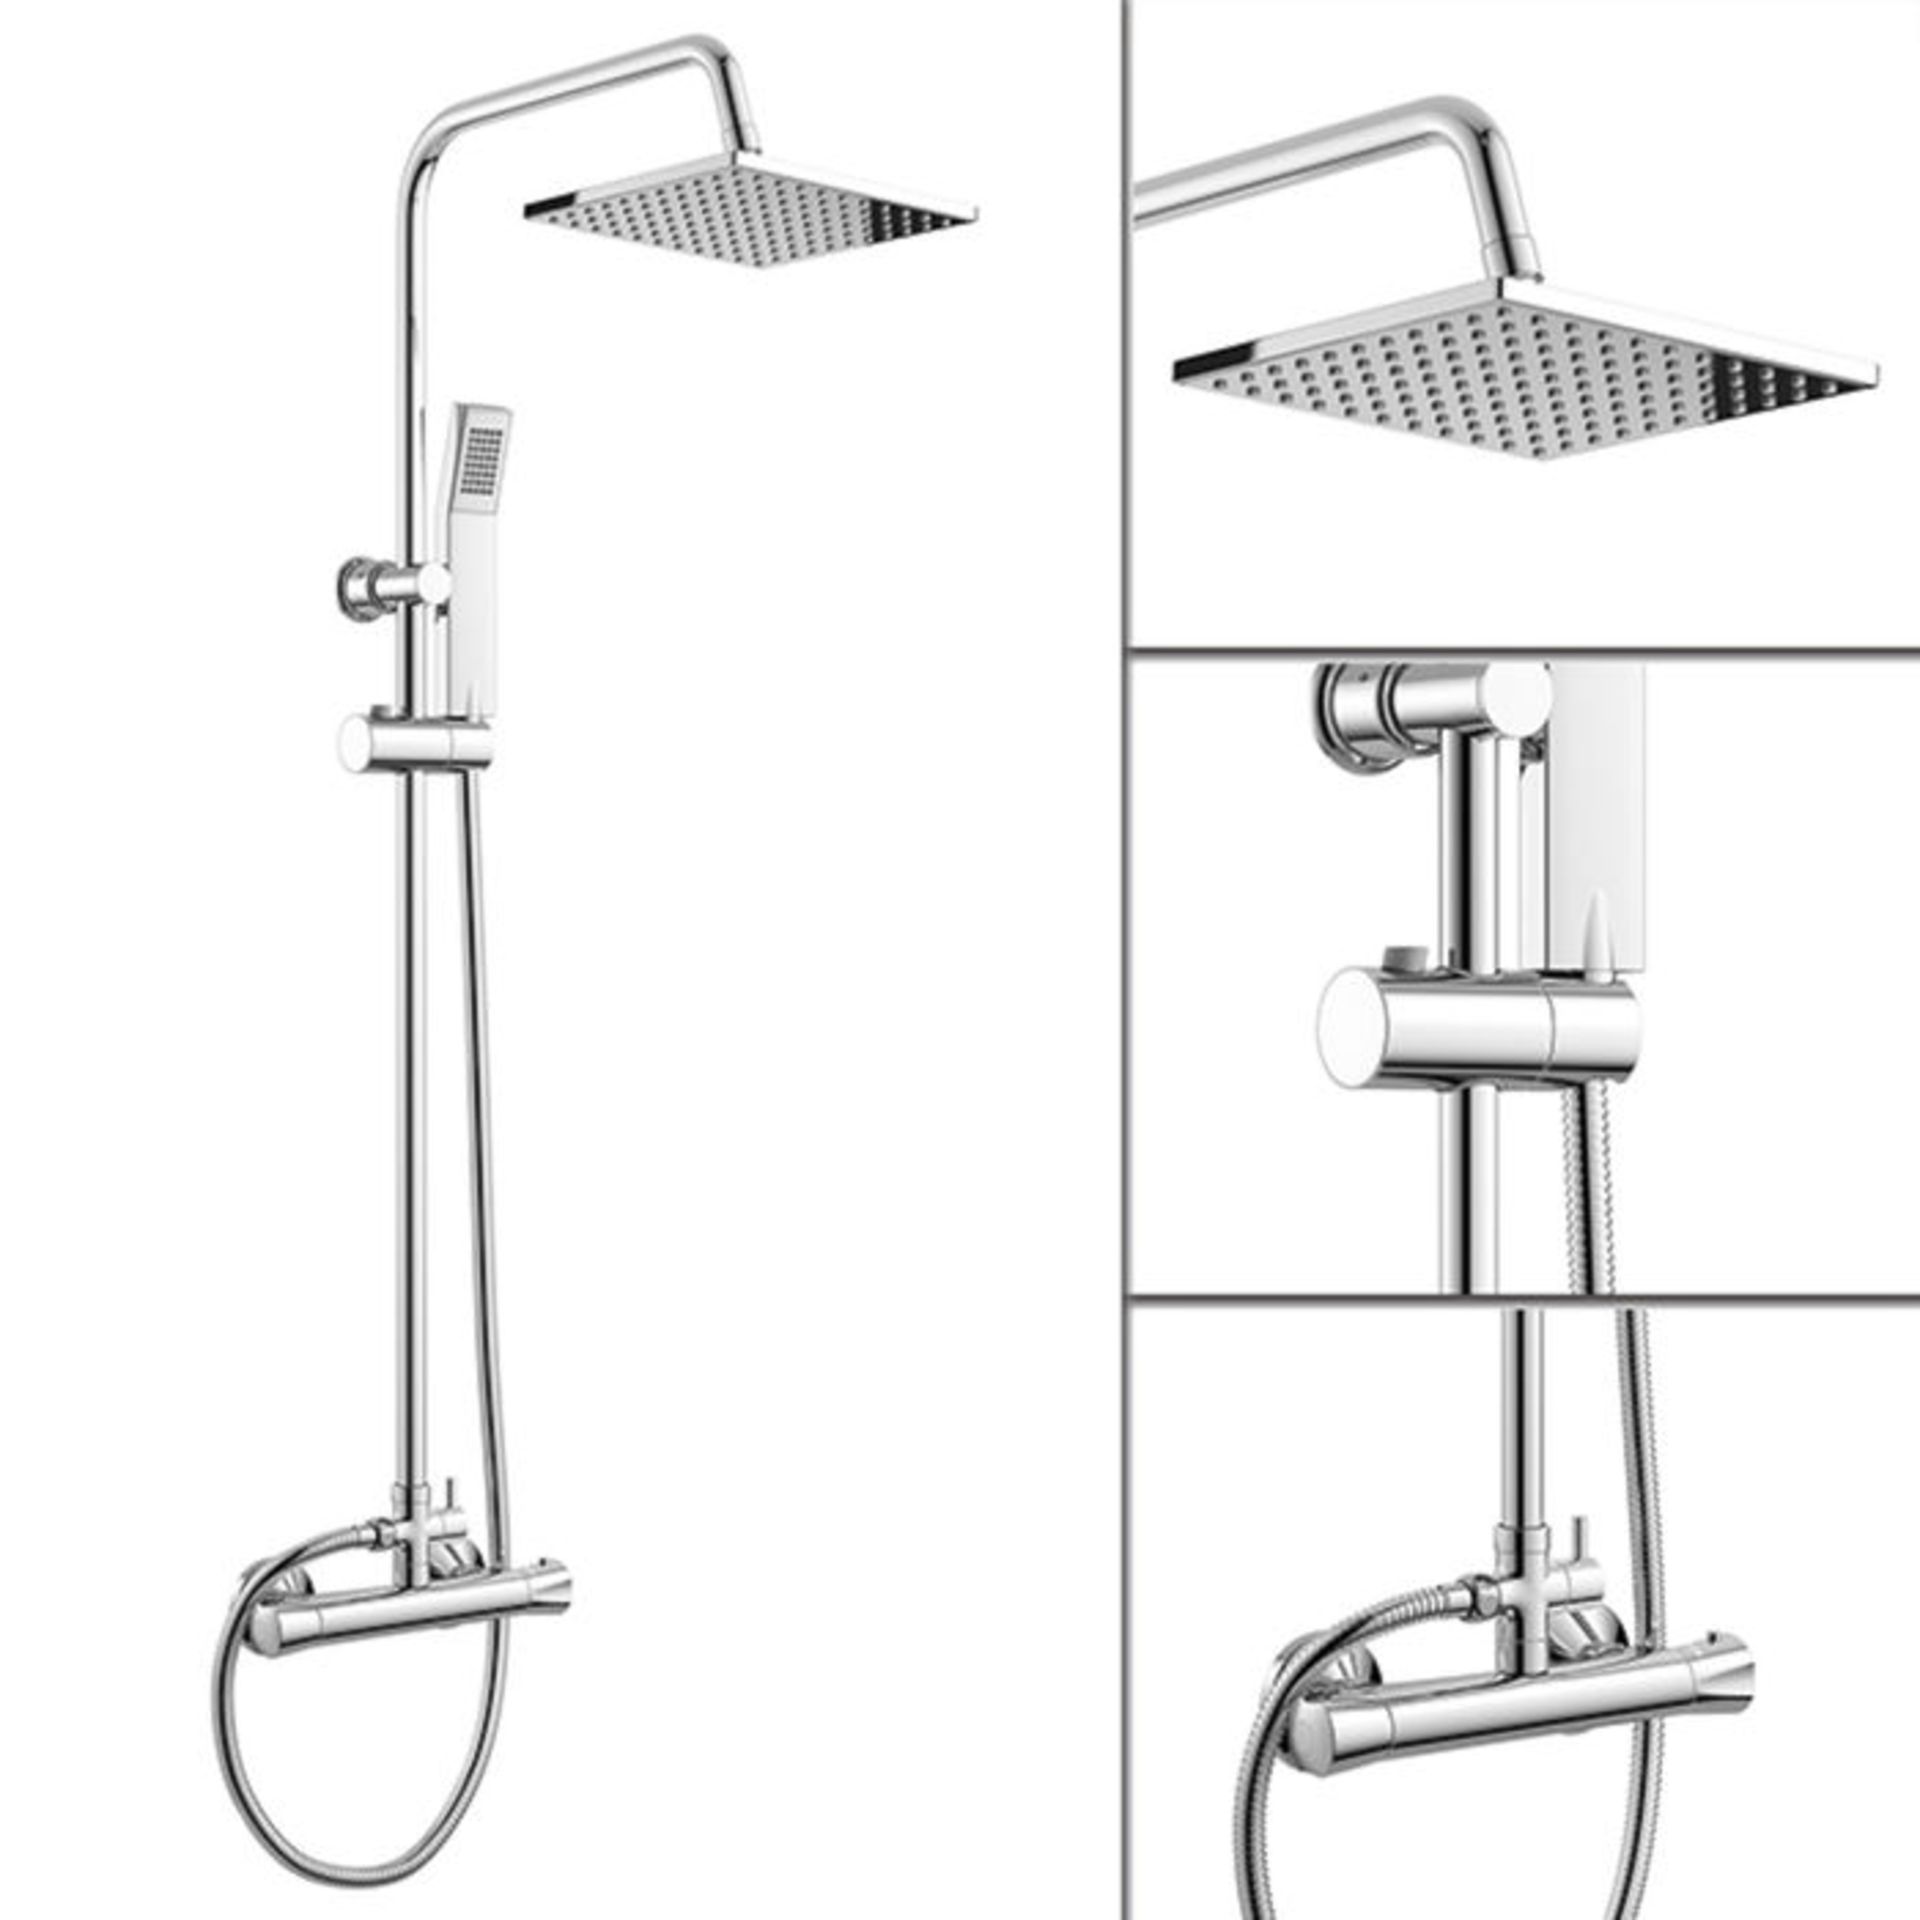 (ED80) Essentials Range - Square Exposed Thermostatic Shower Kit & Head. Curved features and - Image 2 of 2